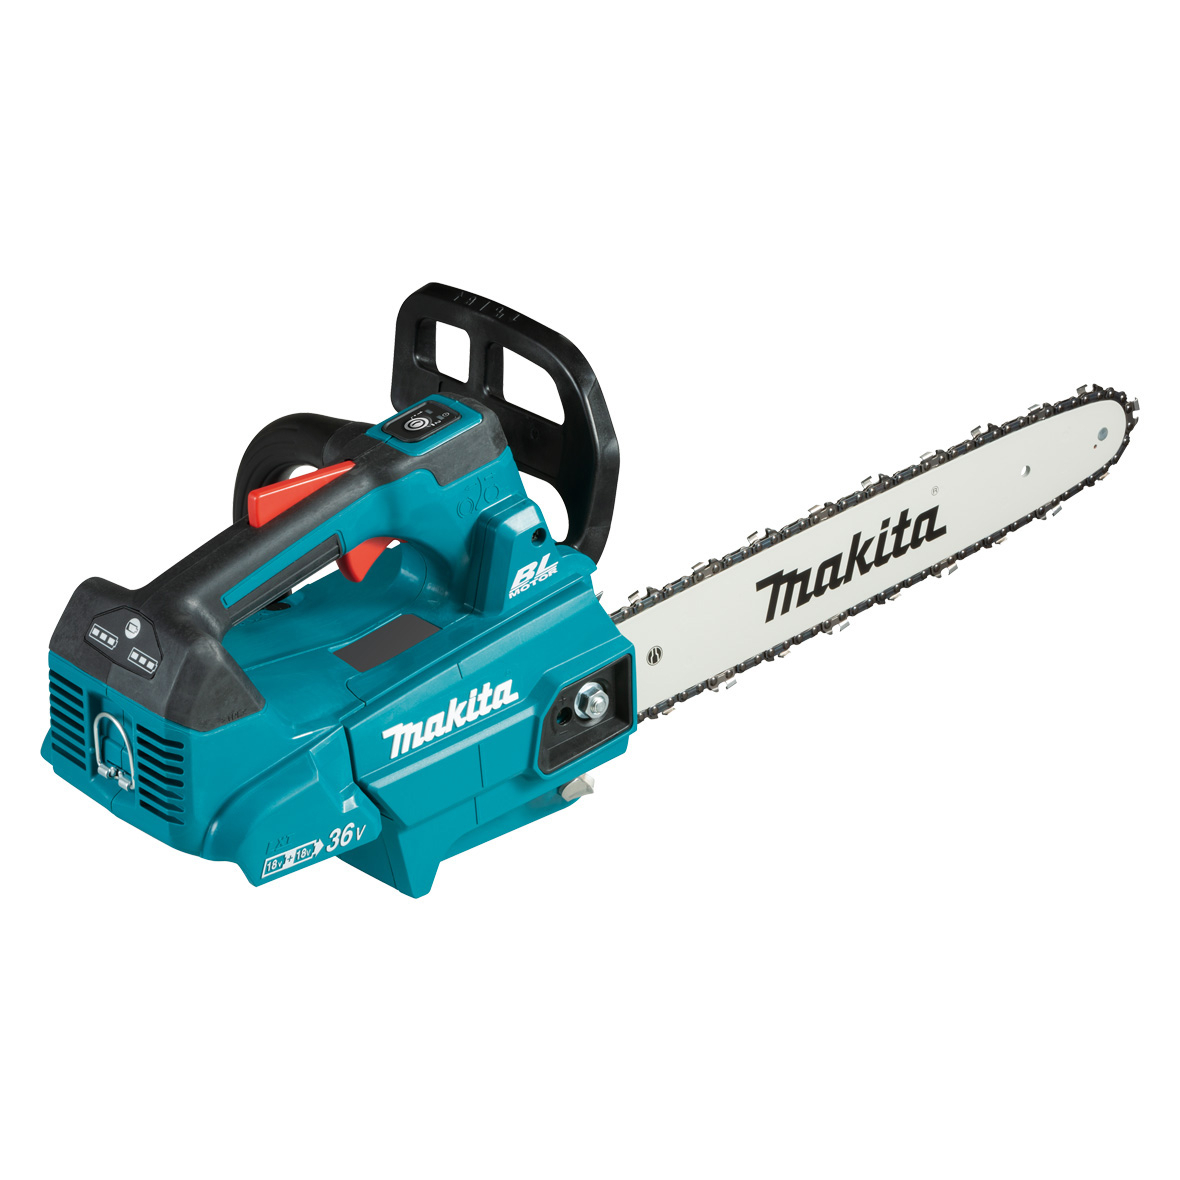 Makita 18Vx2 300mm Brushless Chainsaw (tool only) DUC306Z